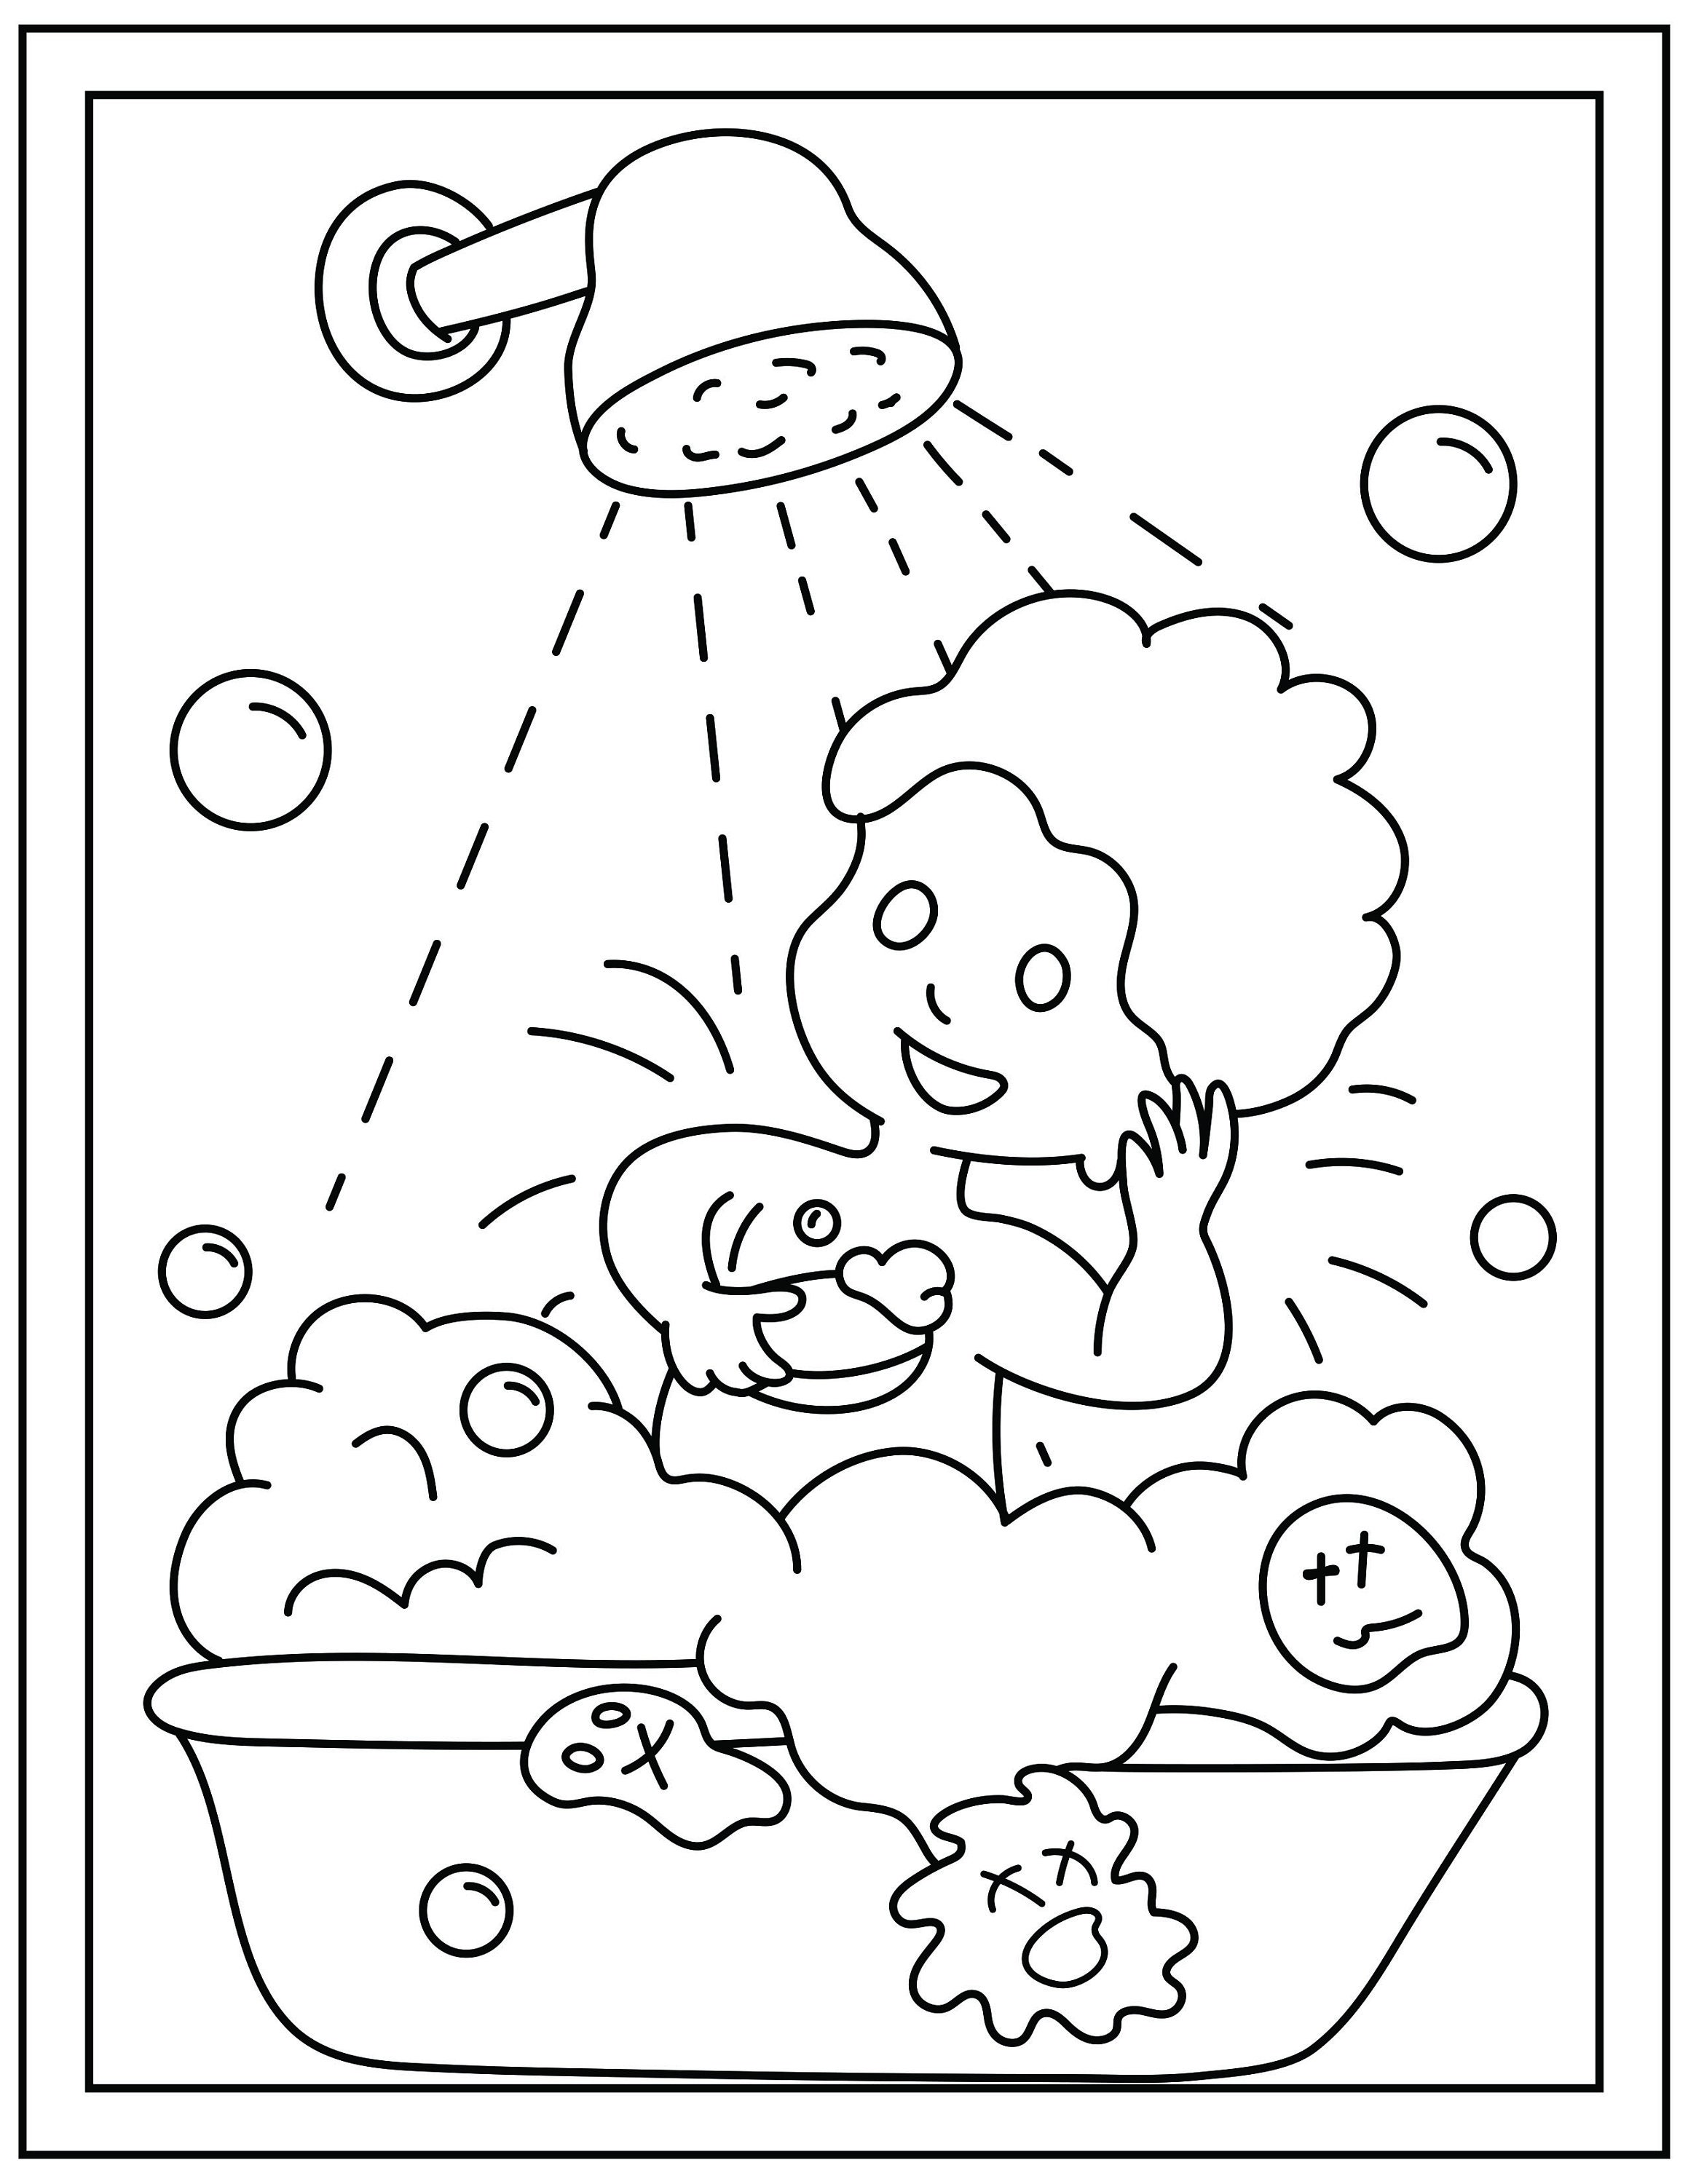 printable-germ-coloring-pages